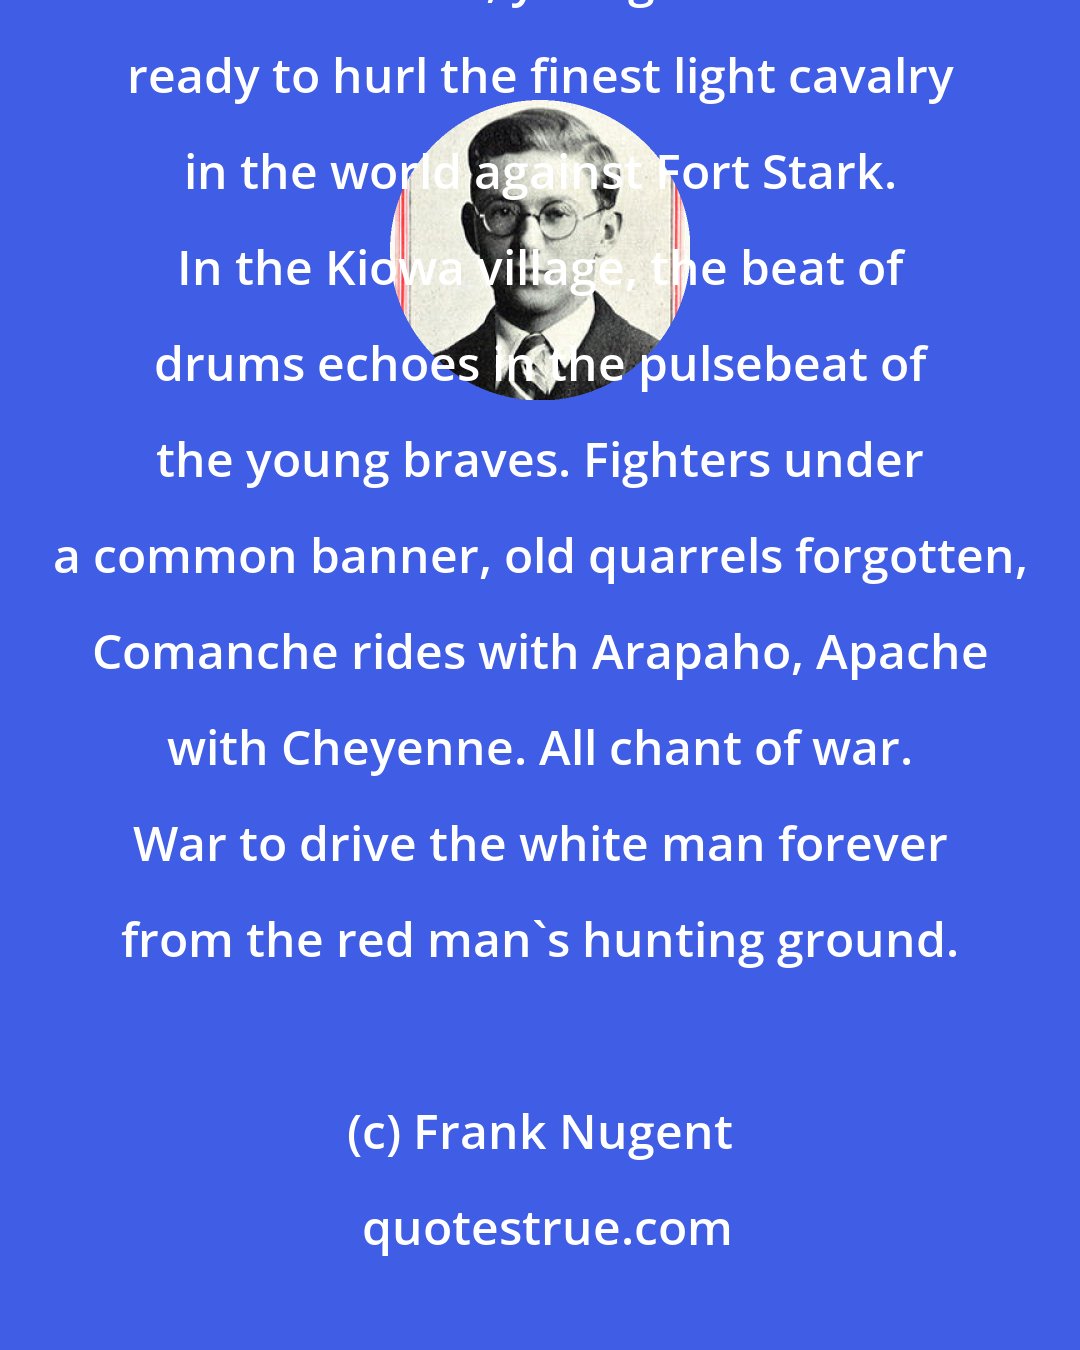 Frank Nugent: Signal smokes, war drums, feathered bonnets against the western sky. New messiahs, young leaders are ready to hurl the finest light cavalry in the world against Fort Stark. In the Kiowa village, the beat of drums echoes in the pulsebeat of the young braves. Fighters under a common banner, old quarrels forgotten, Comanche rides with Arapaho, Apache with Cheyenne. All chant of war. War to drive the white man forever from the red man's hunting ground.